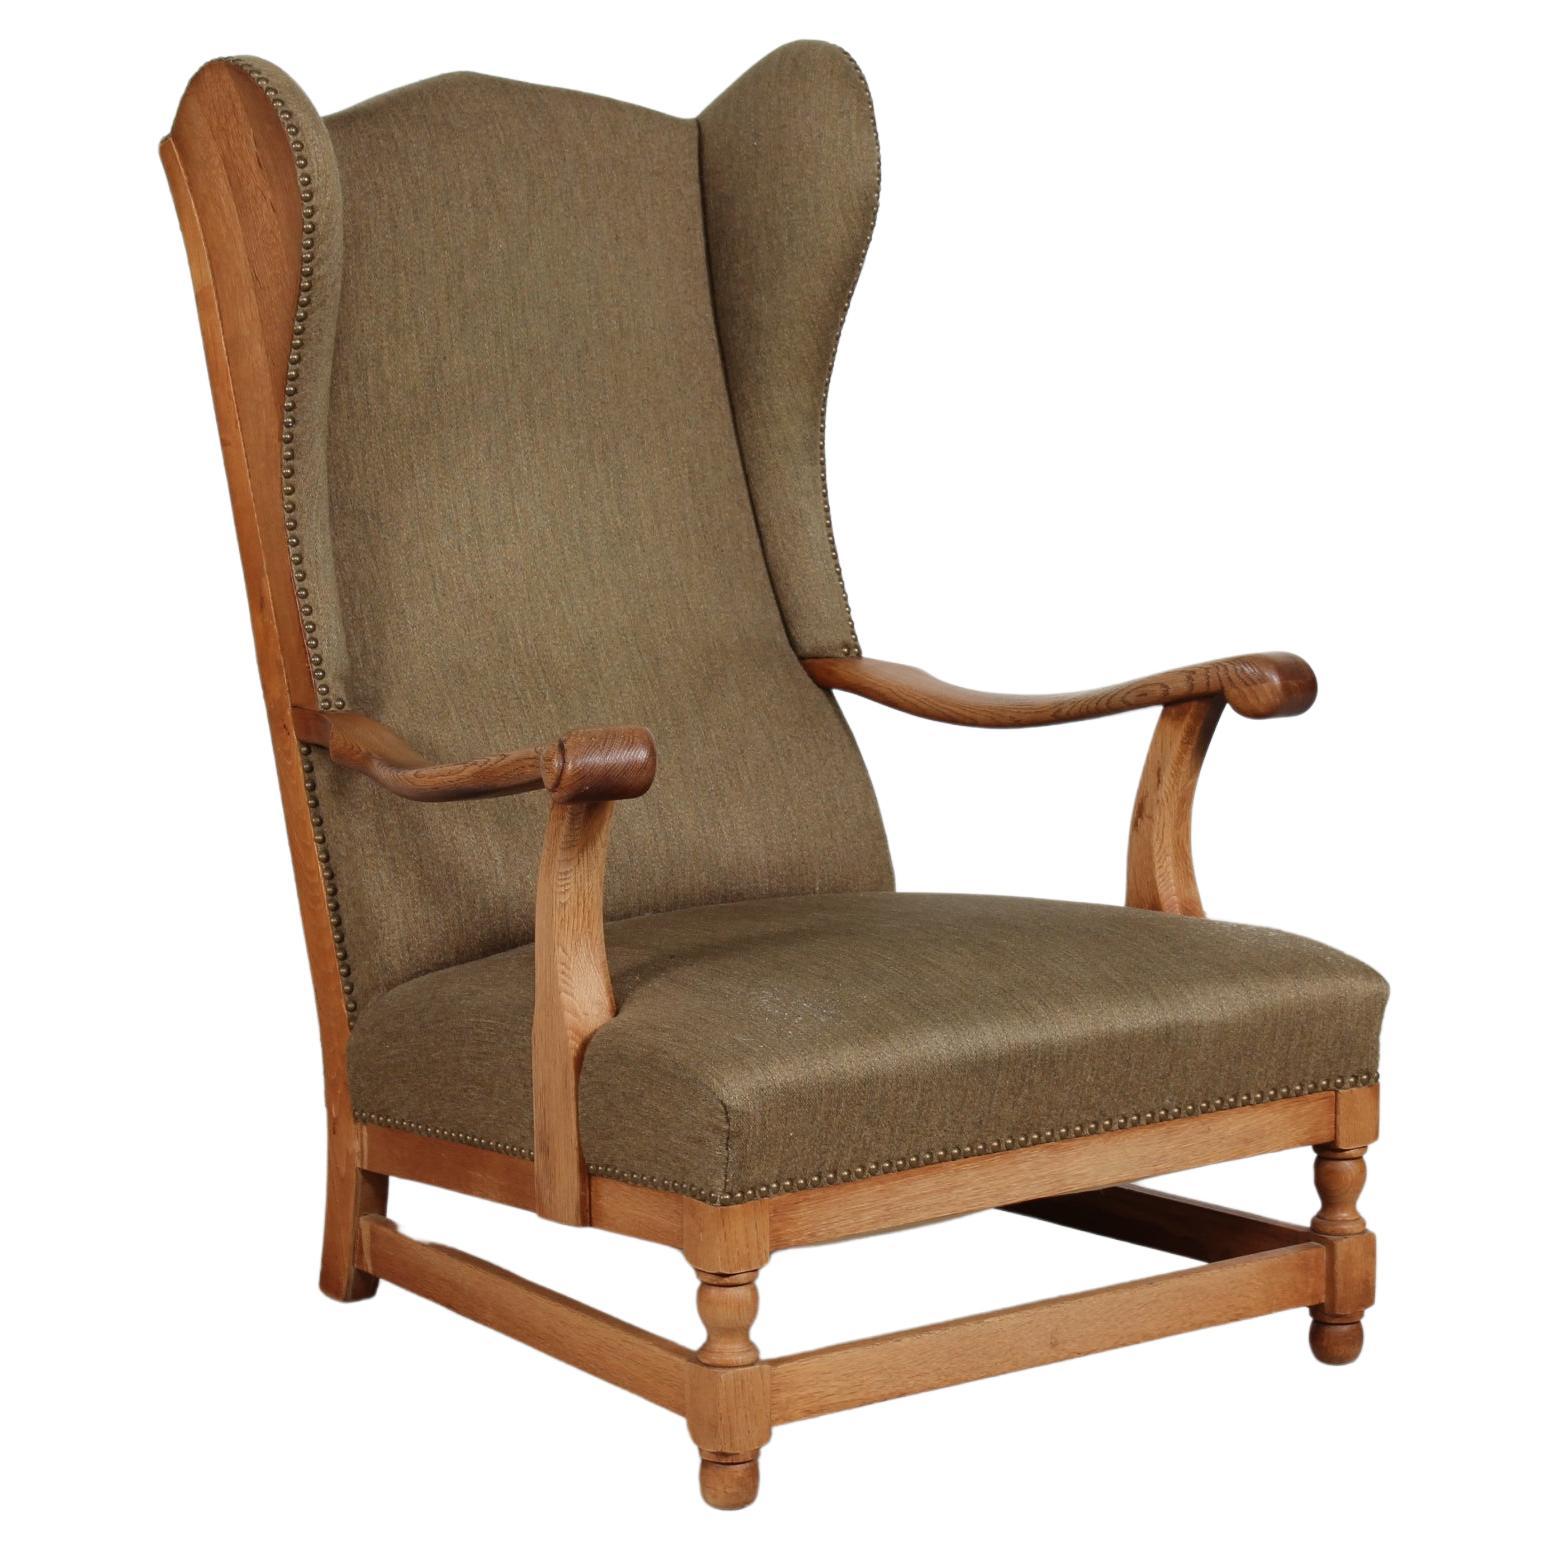 Stunning Highback King Chair of Solid Oak with Greenish Wool Denmark 1930-40 For Sale